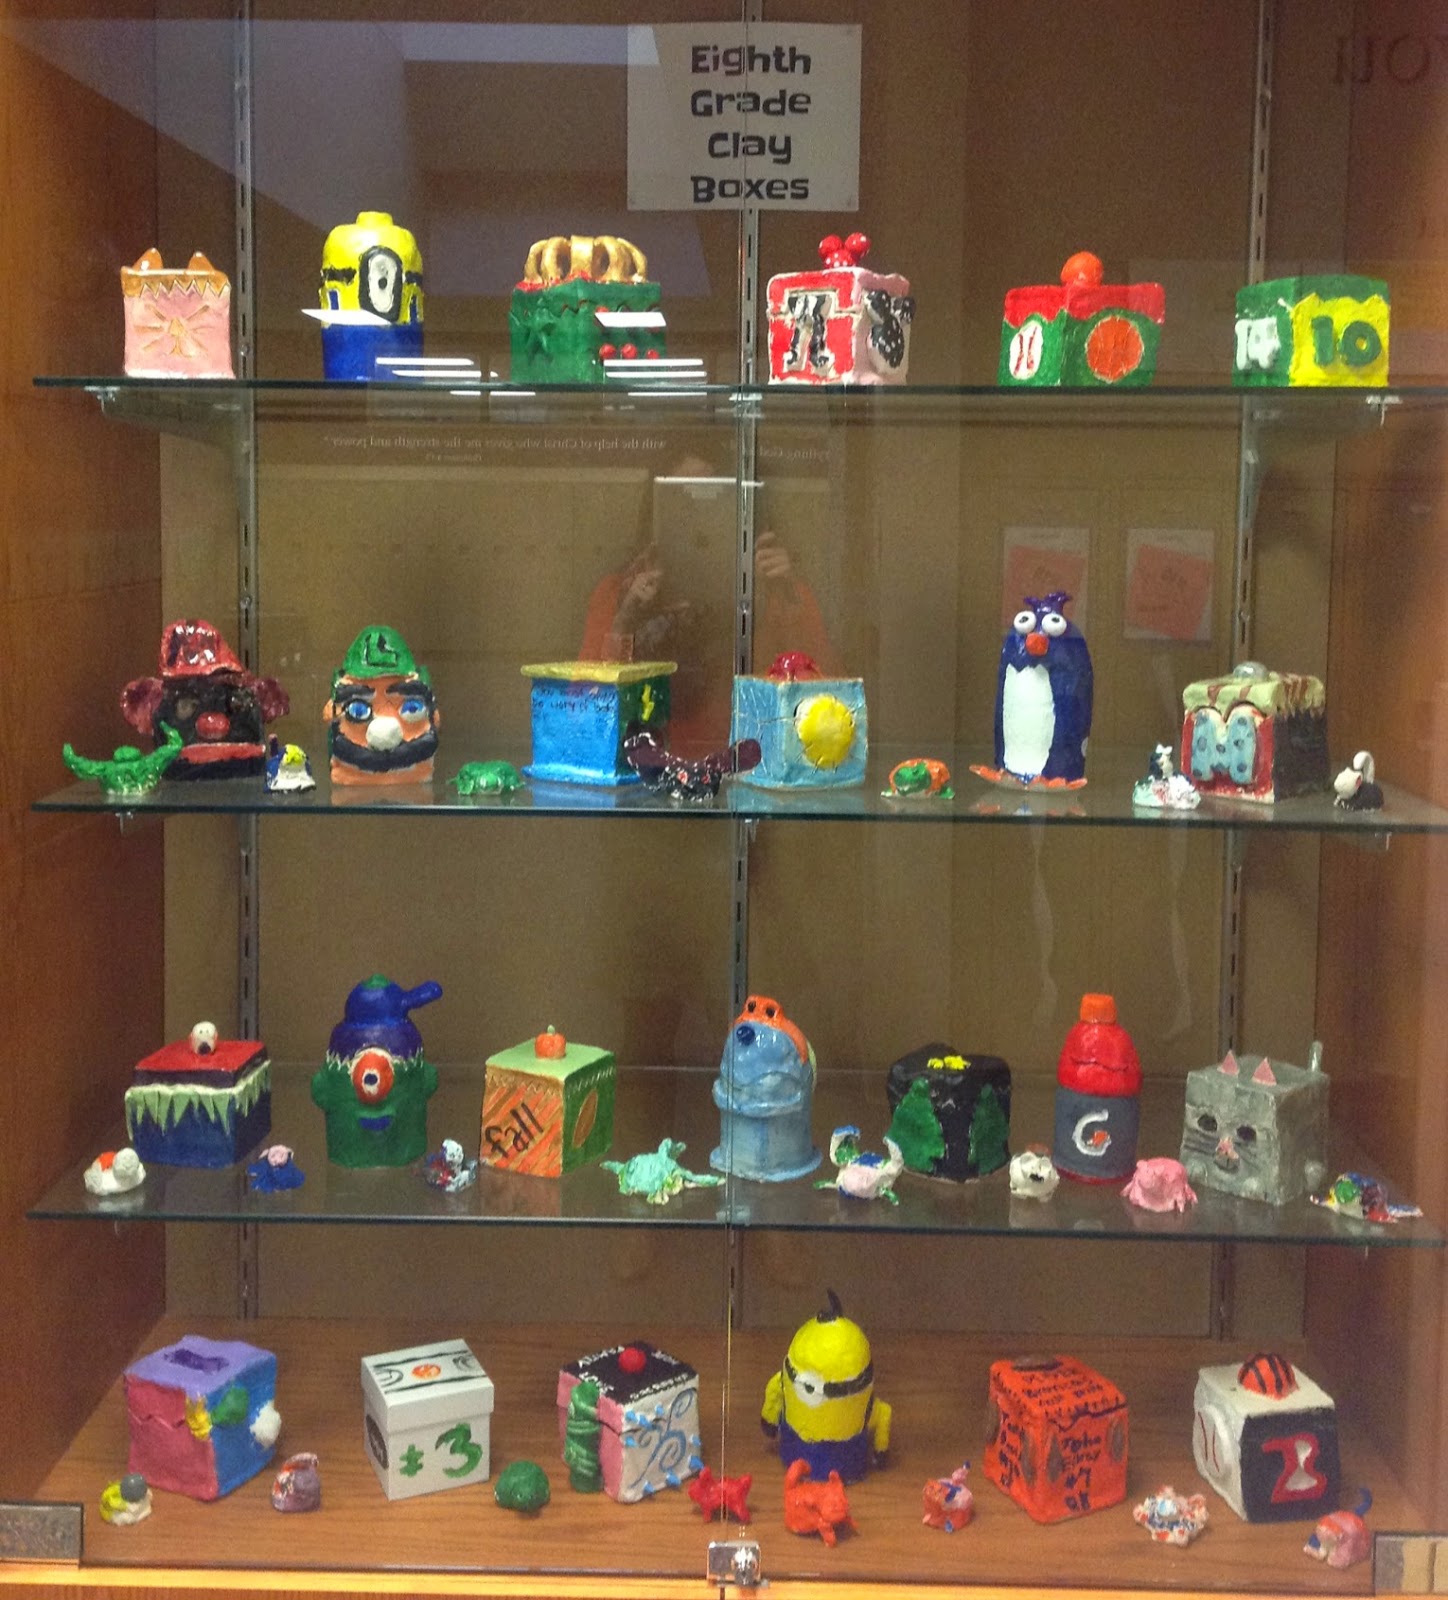 Middle School Art Themed Clay Boxes